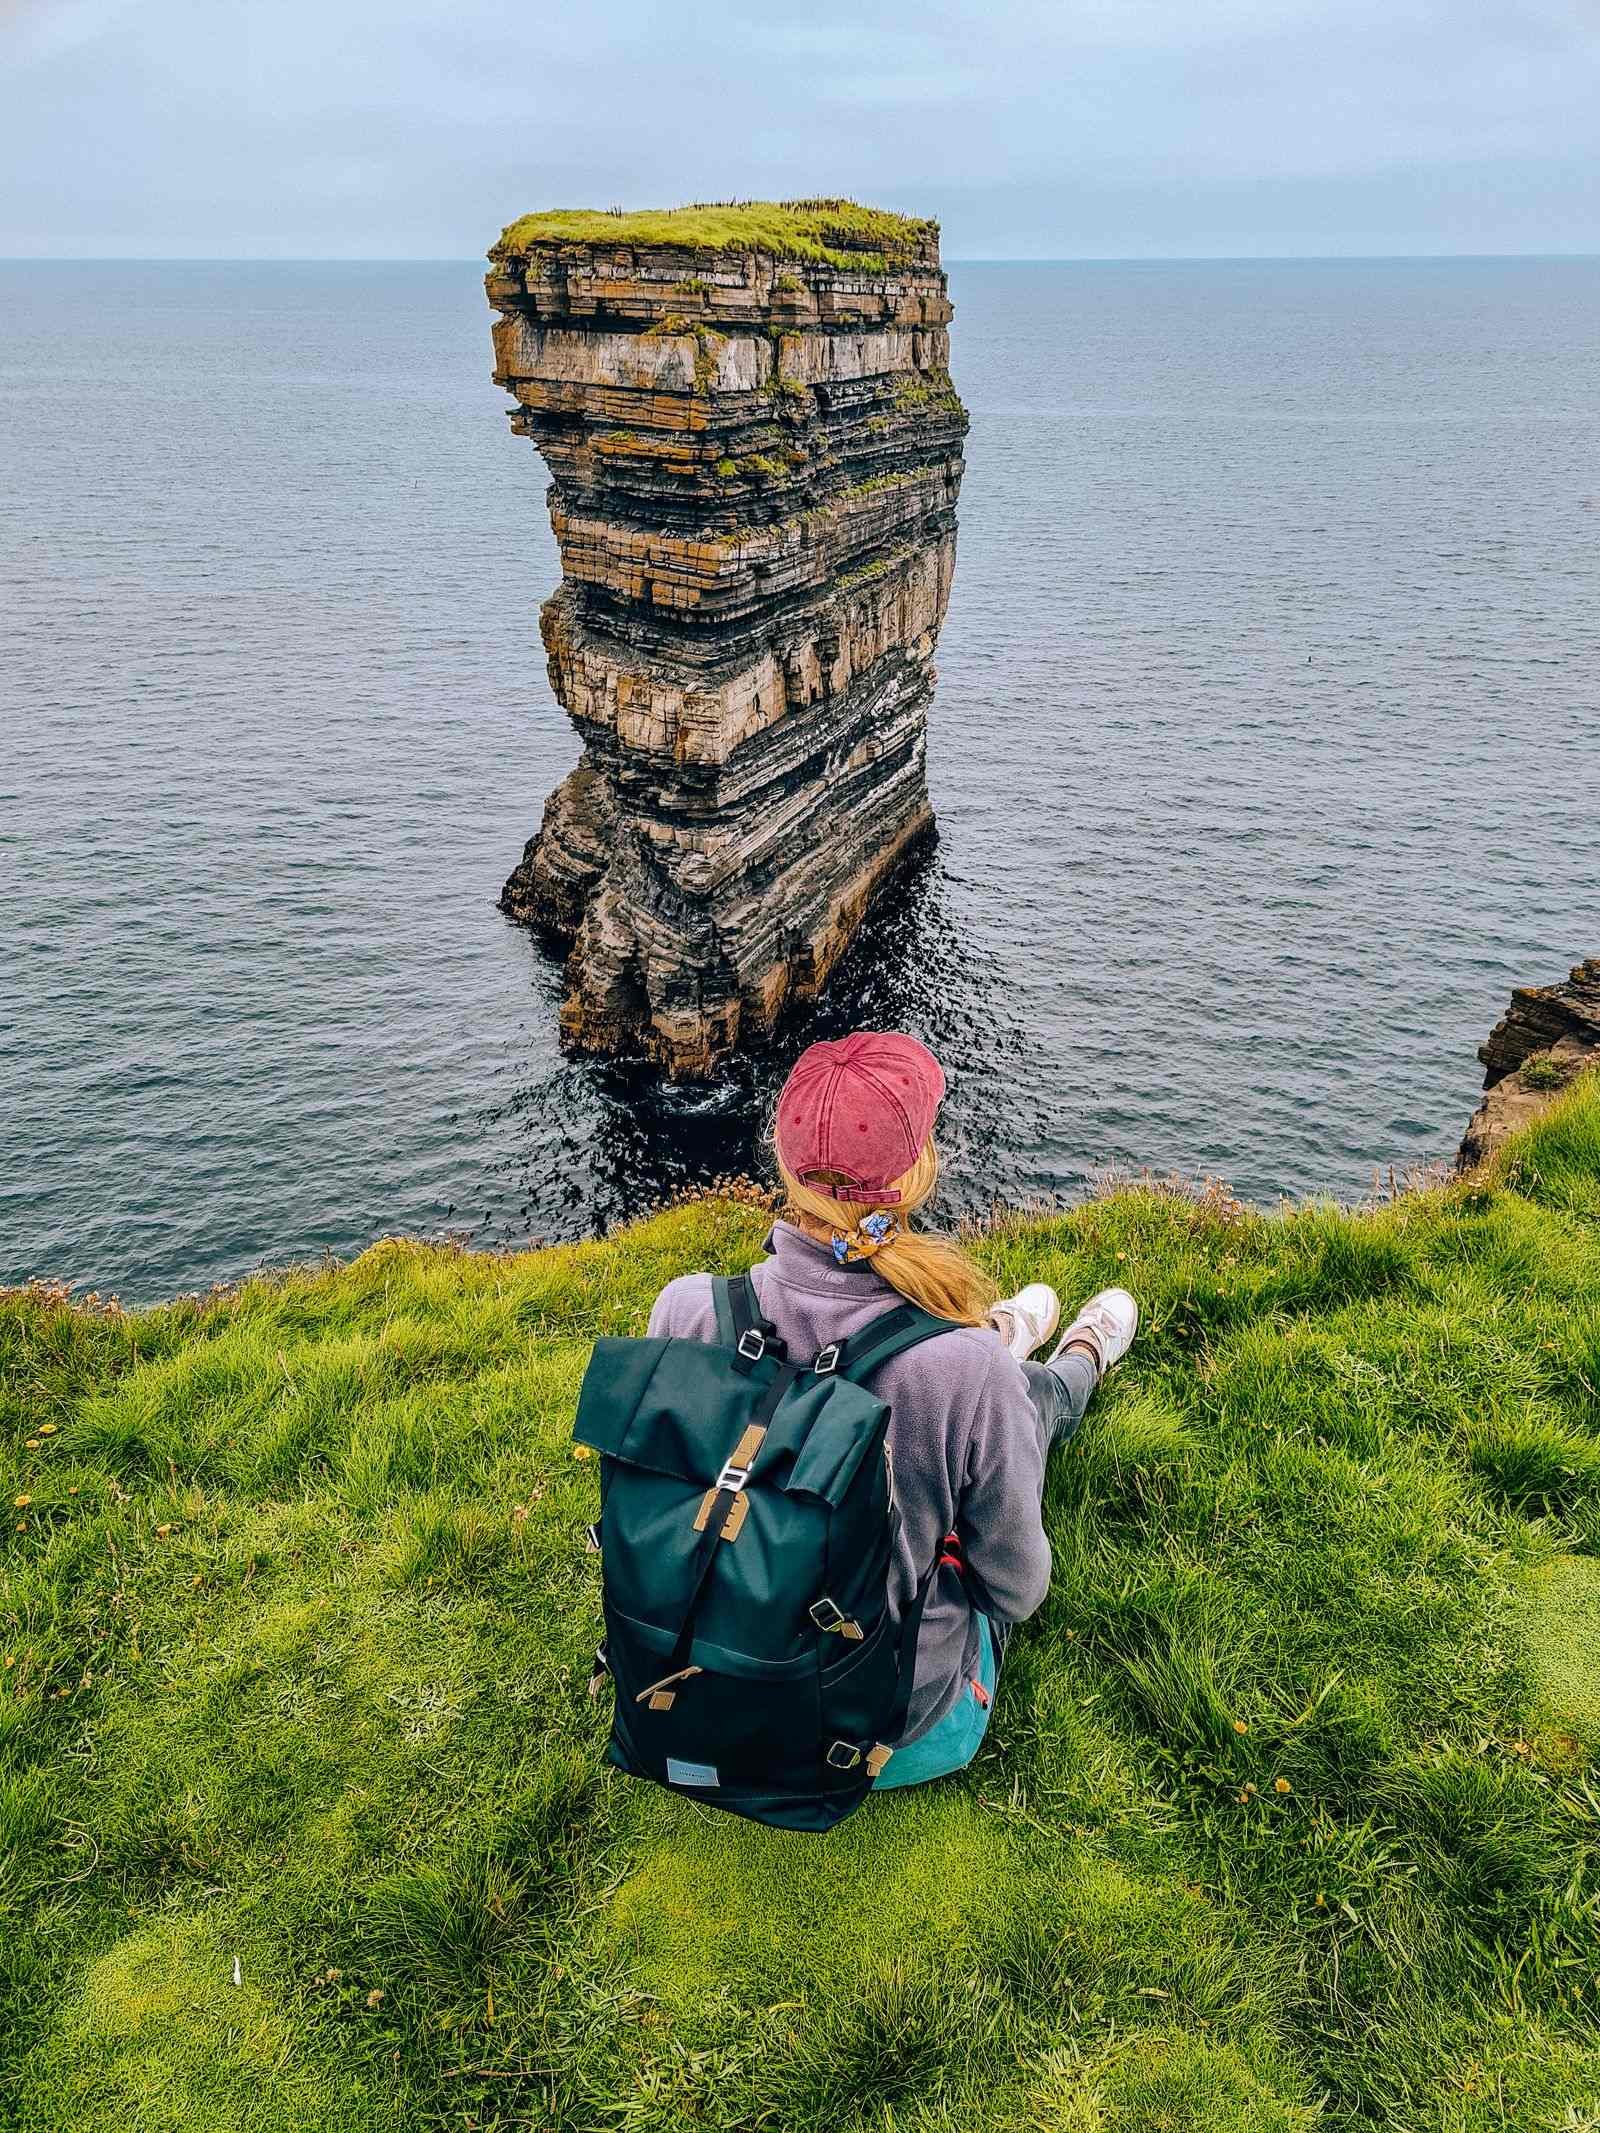 A girl sitting on the edge of a cliff looking out onto a sea stack sticking out of the ocean